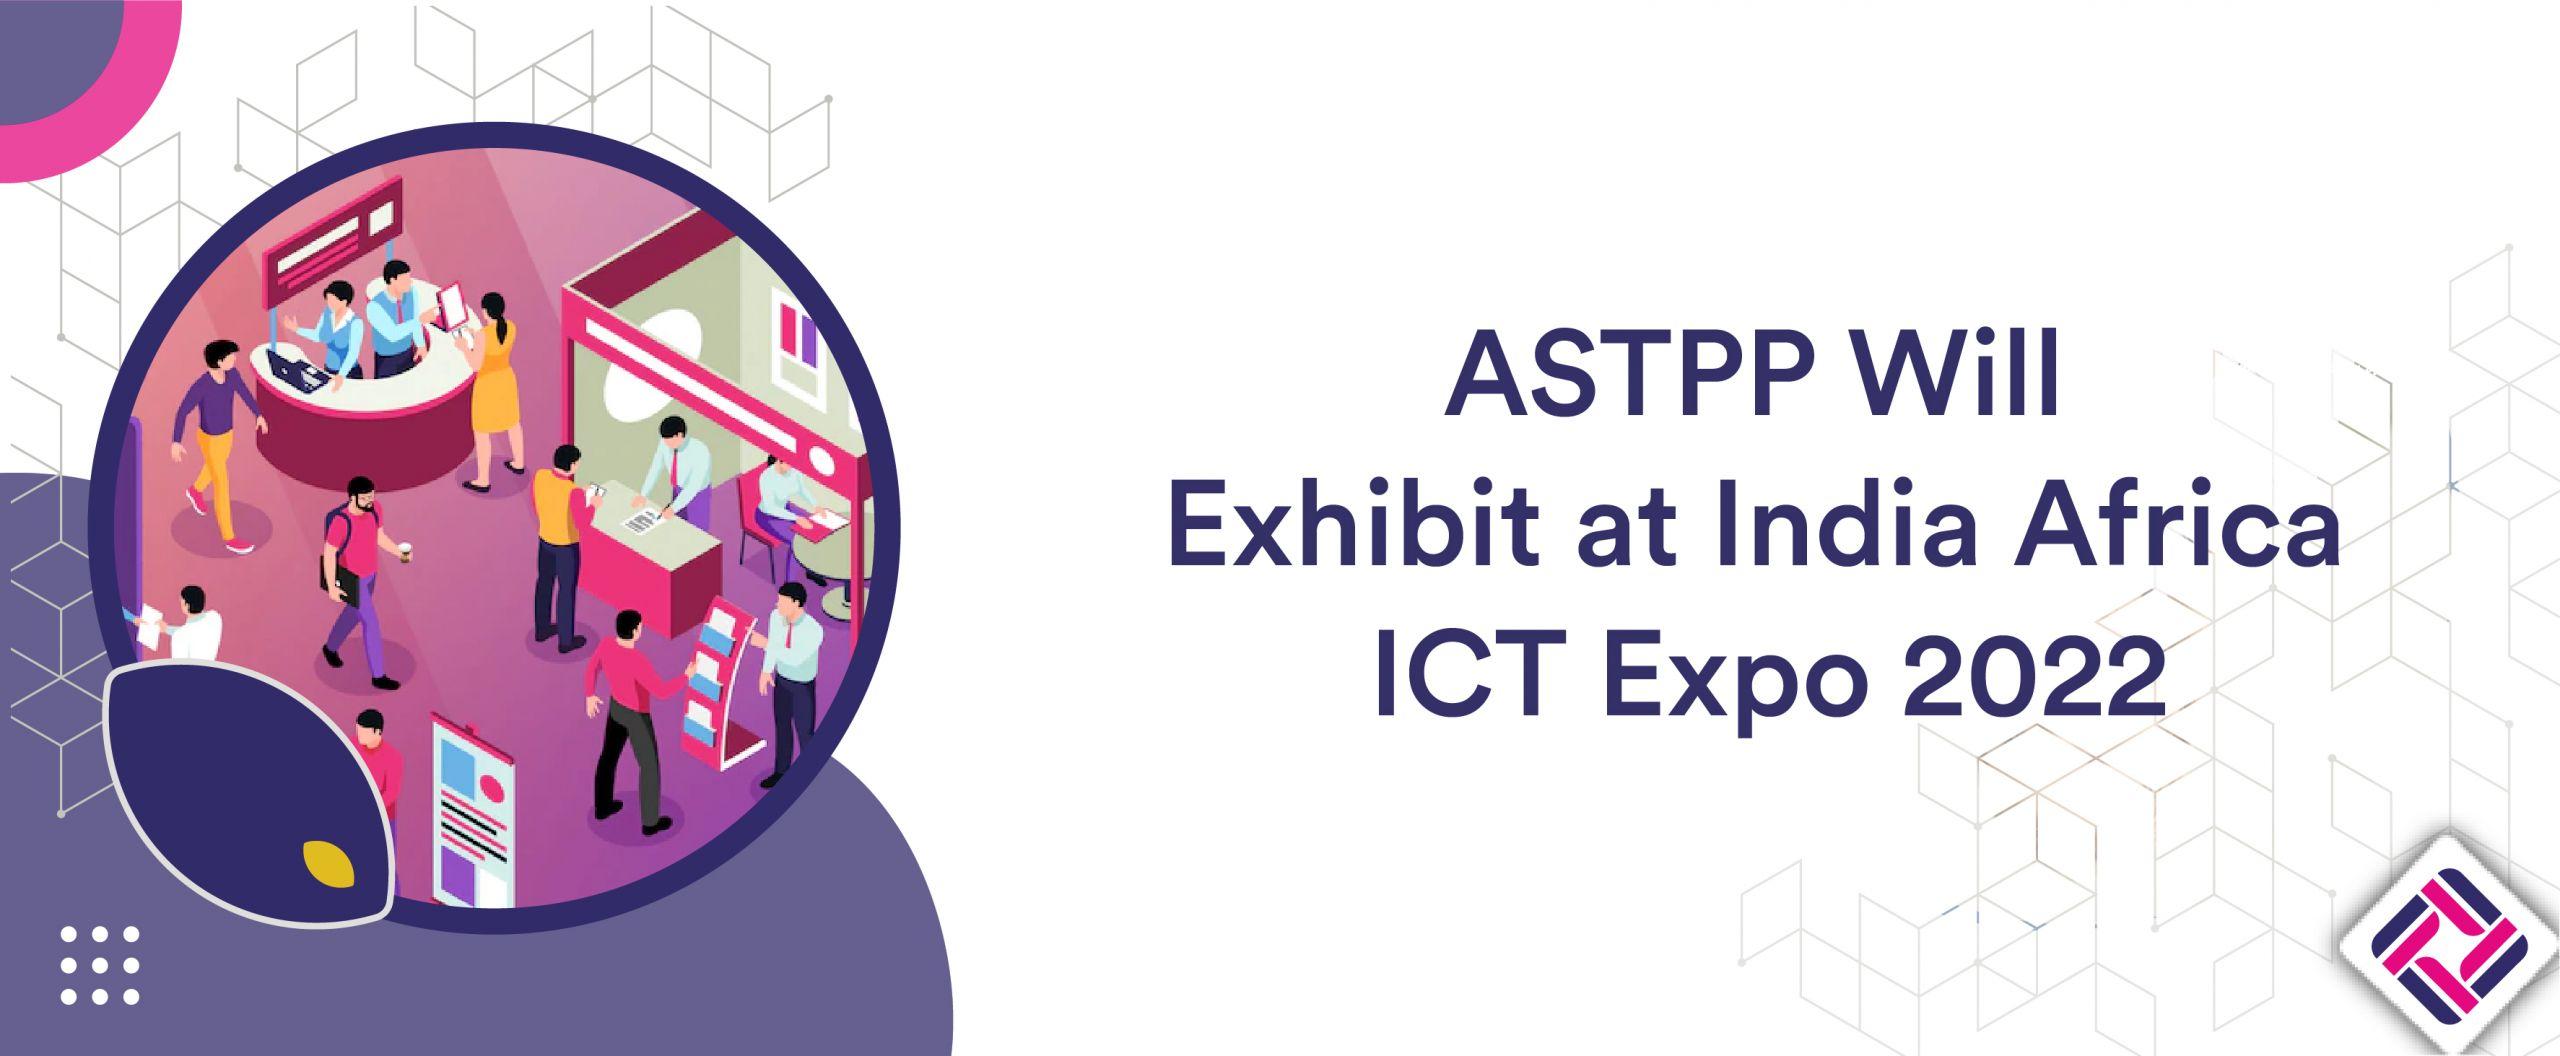 ASTPP Will Exhibit at Indo Africa ICT Expo 2022